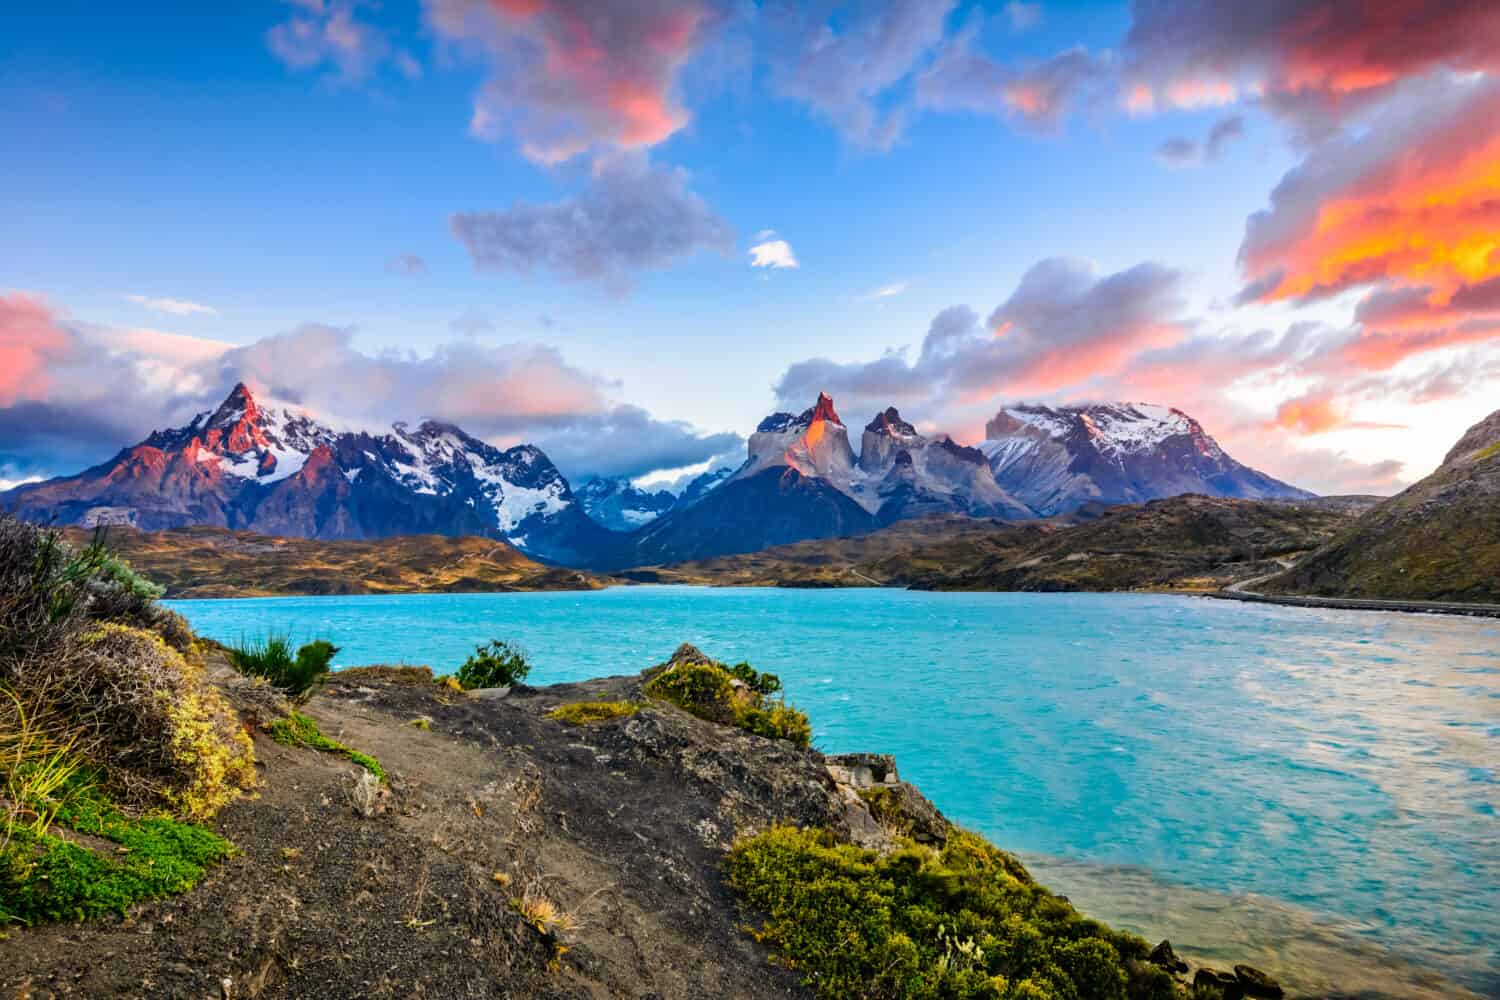 Torres del Paine over the Pehoe lake, Patagonia, Chile - Southern Patagonian Ice Field, Magellanes Region of South America